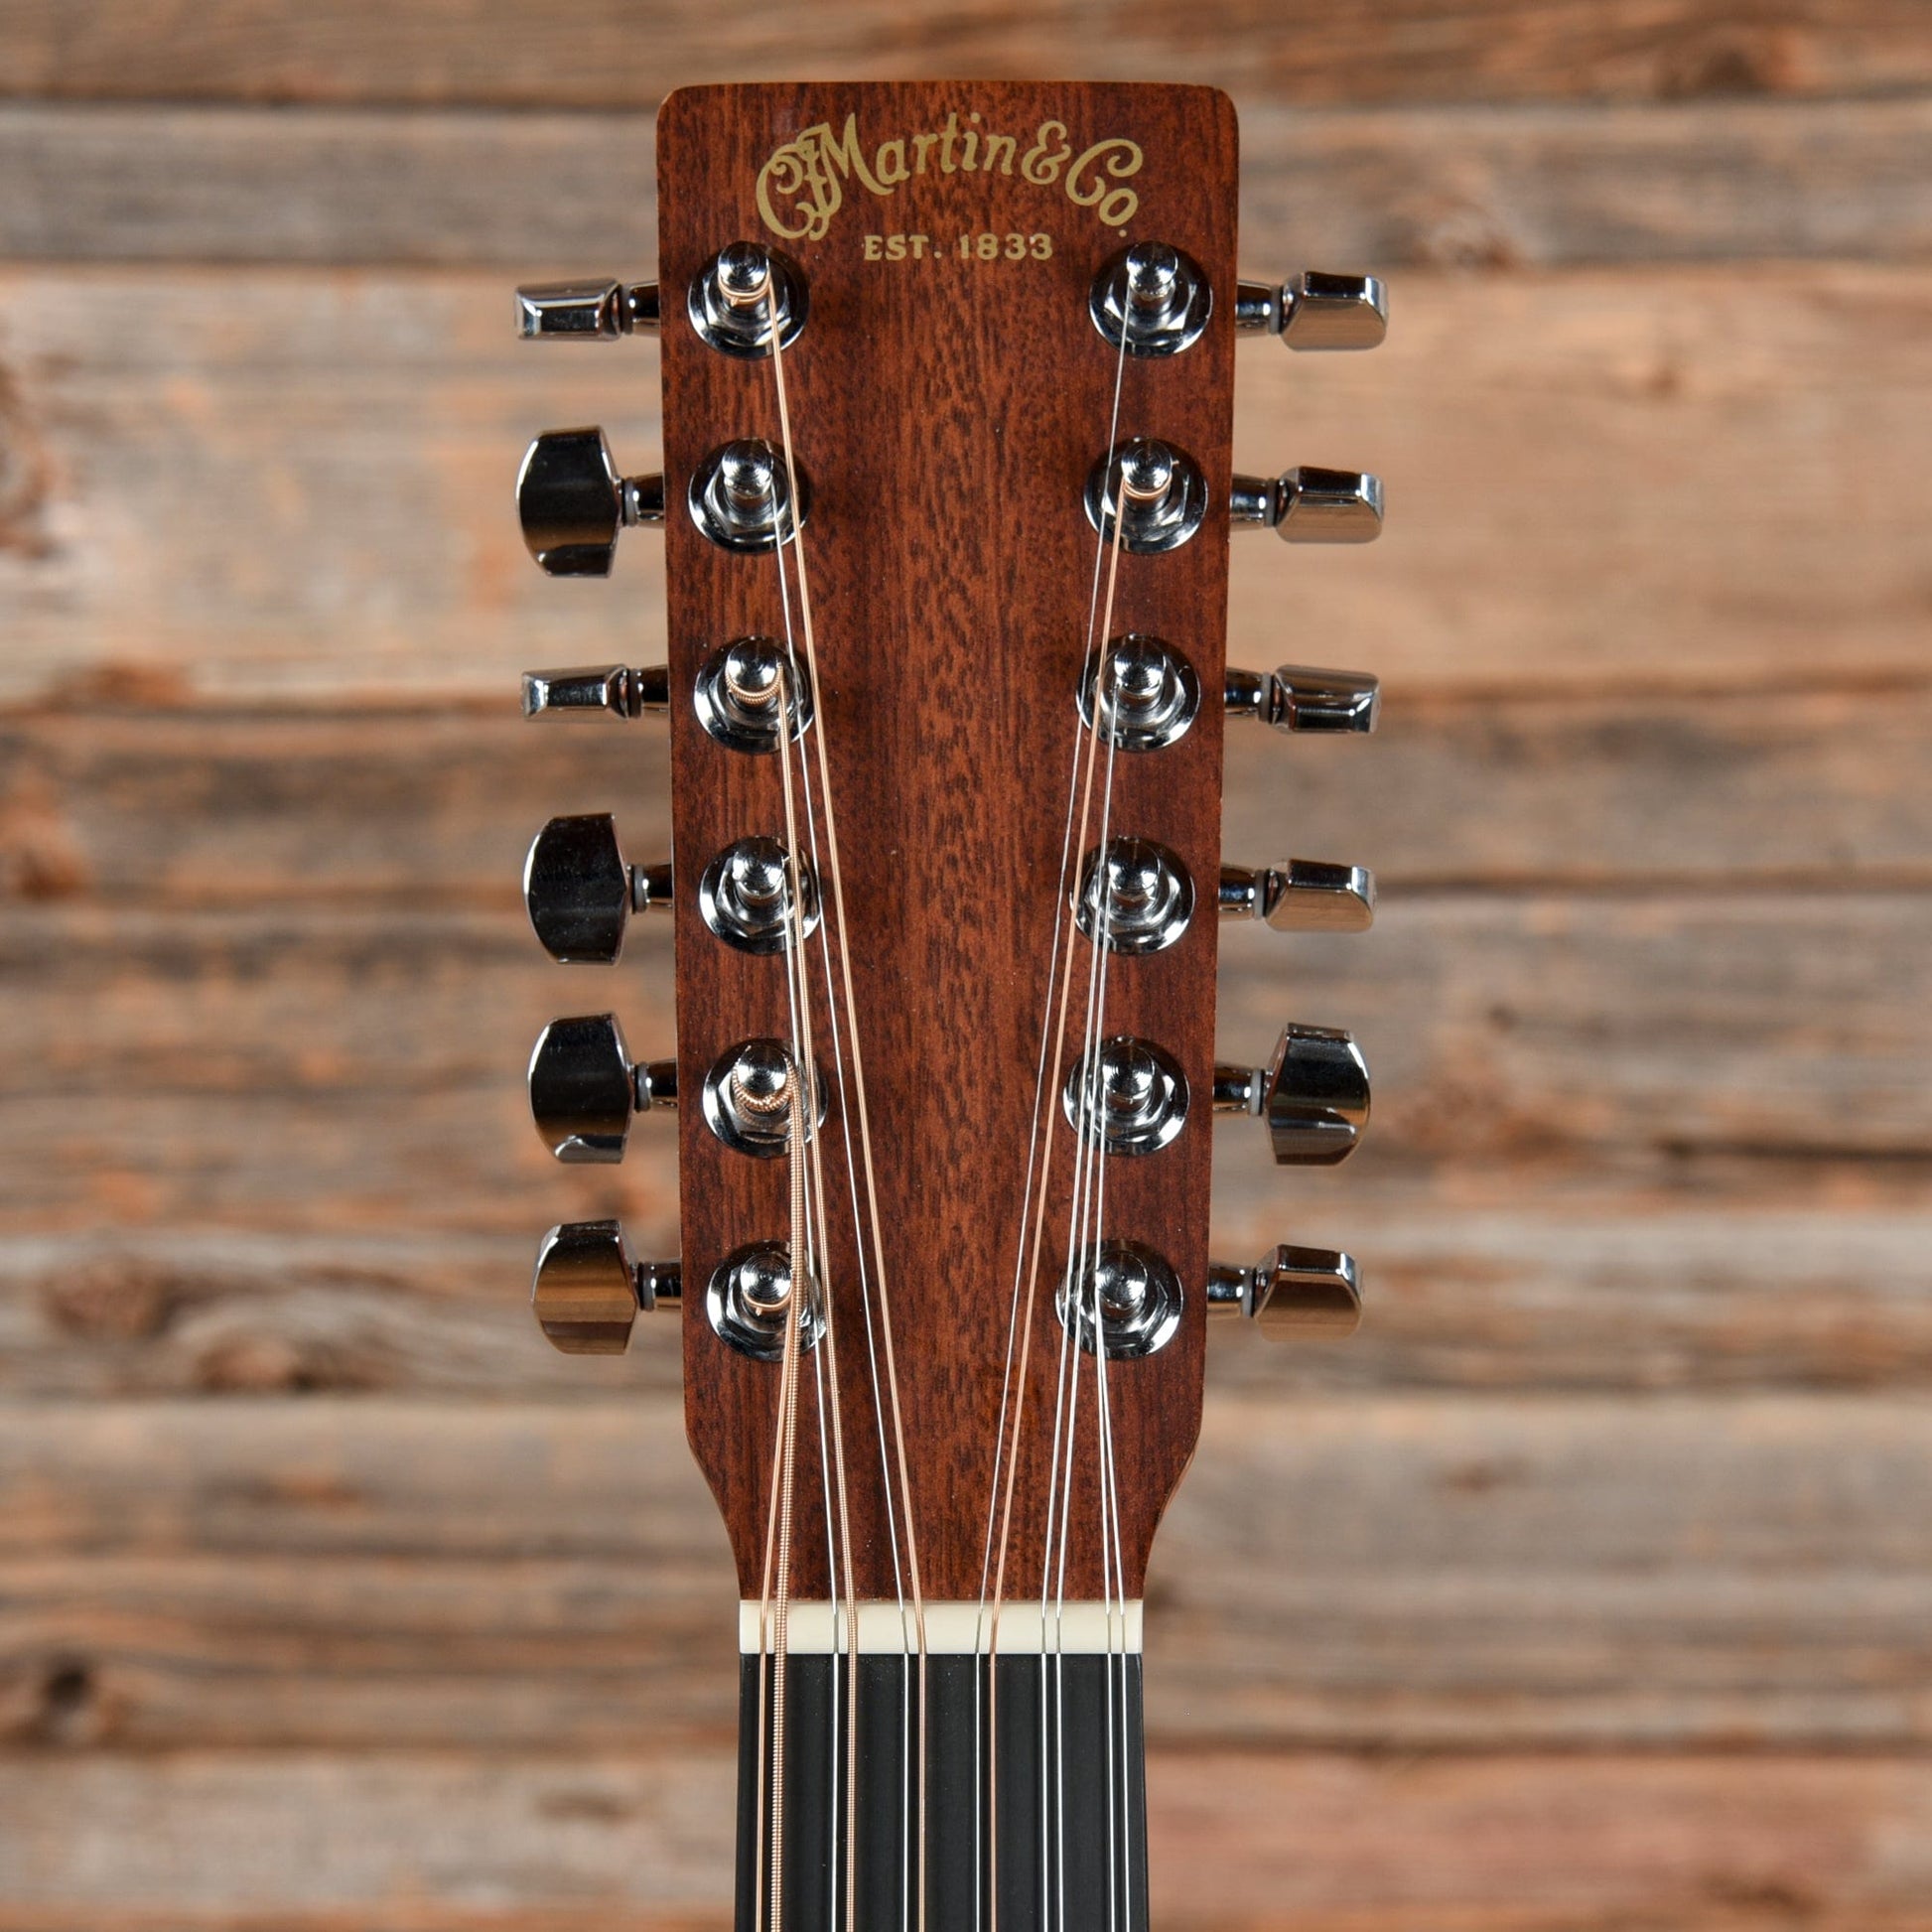 Martin X Series Special 12 Natural 2019 Acoustic Guitars / Dreadnought